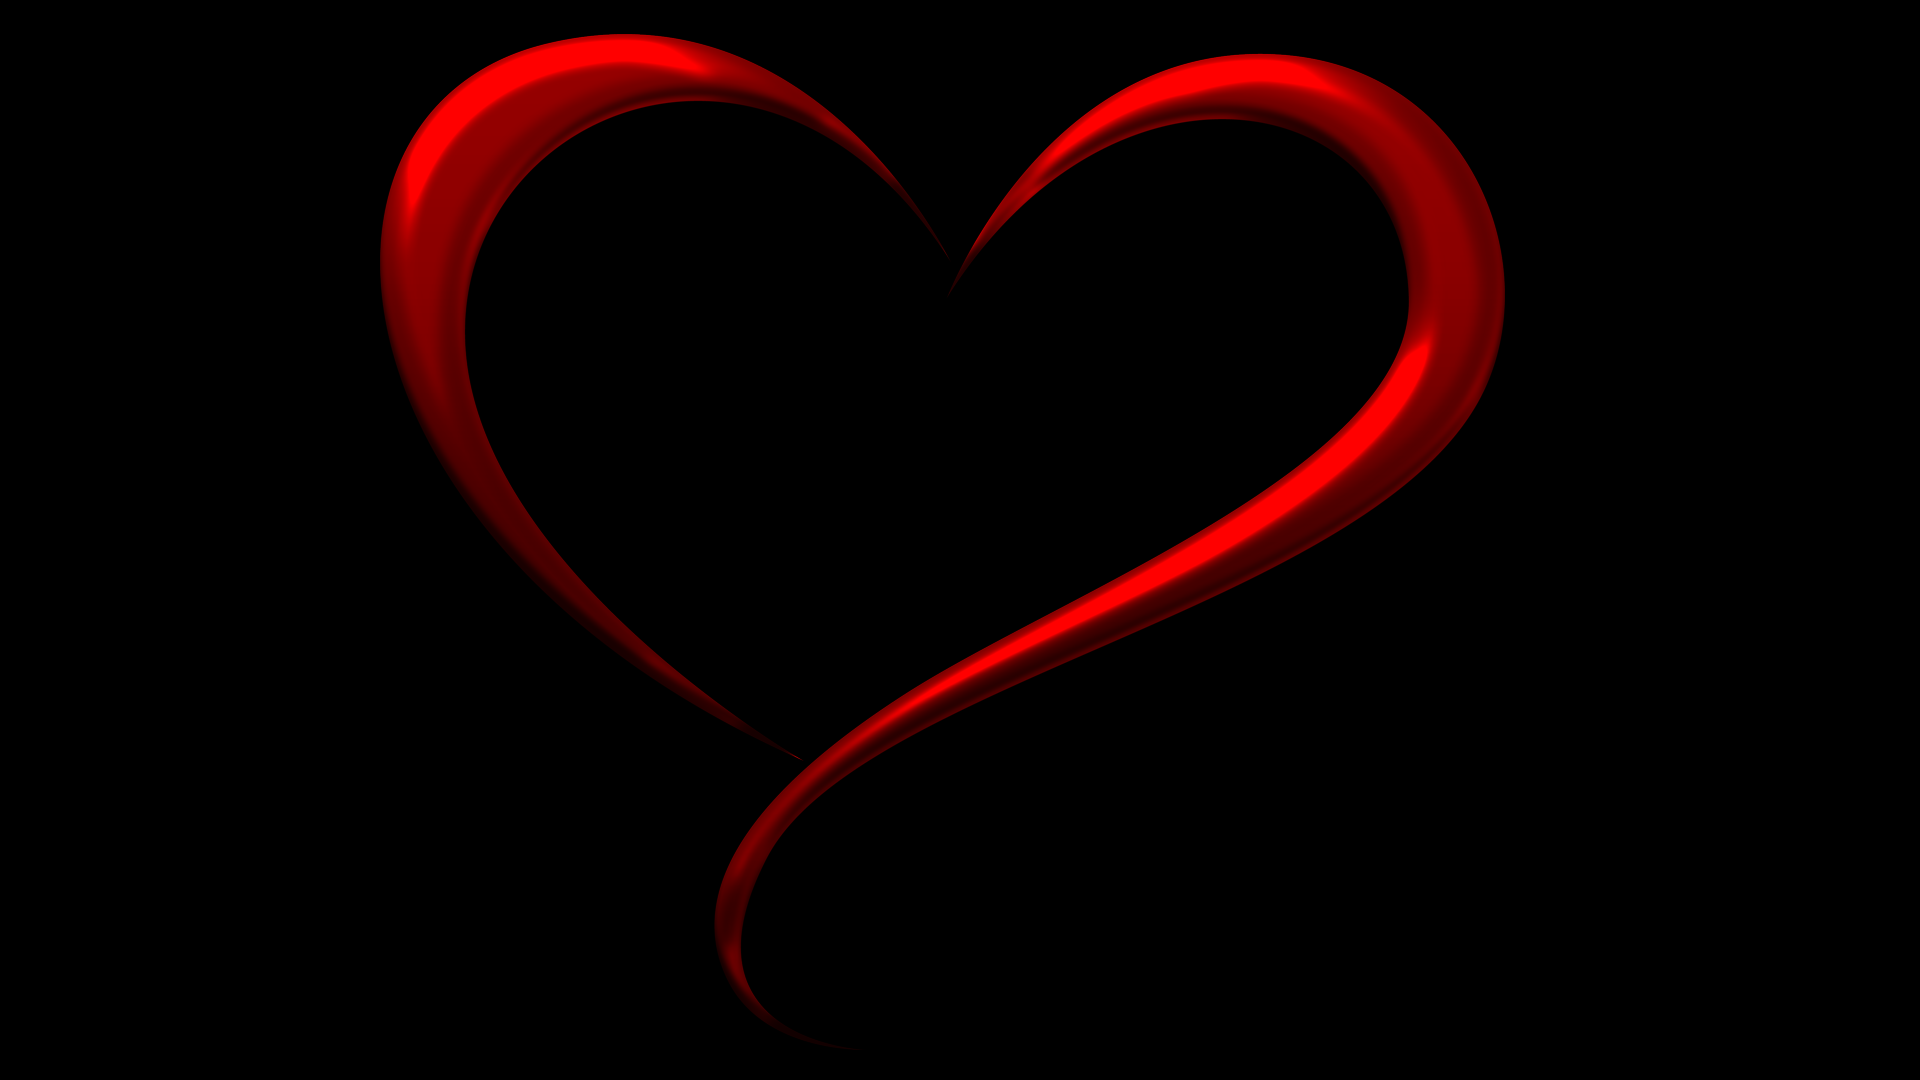 Simple Red Heart Background HD Wallpaper. Background Image